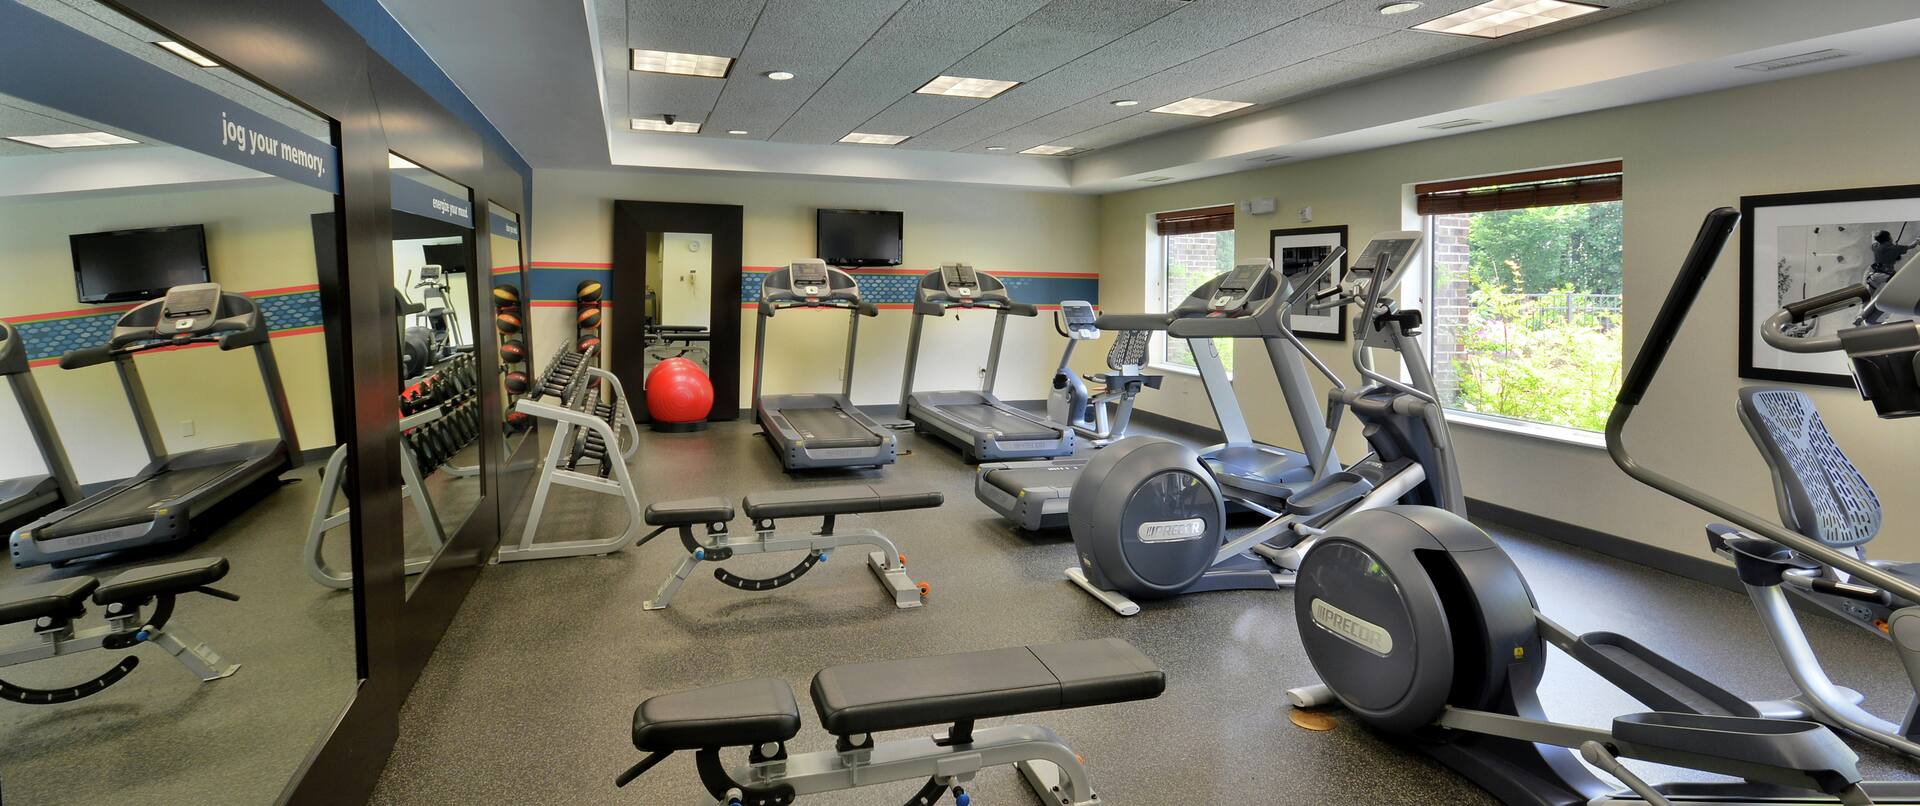 Fitness center with weight benches and cardio machines